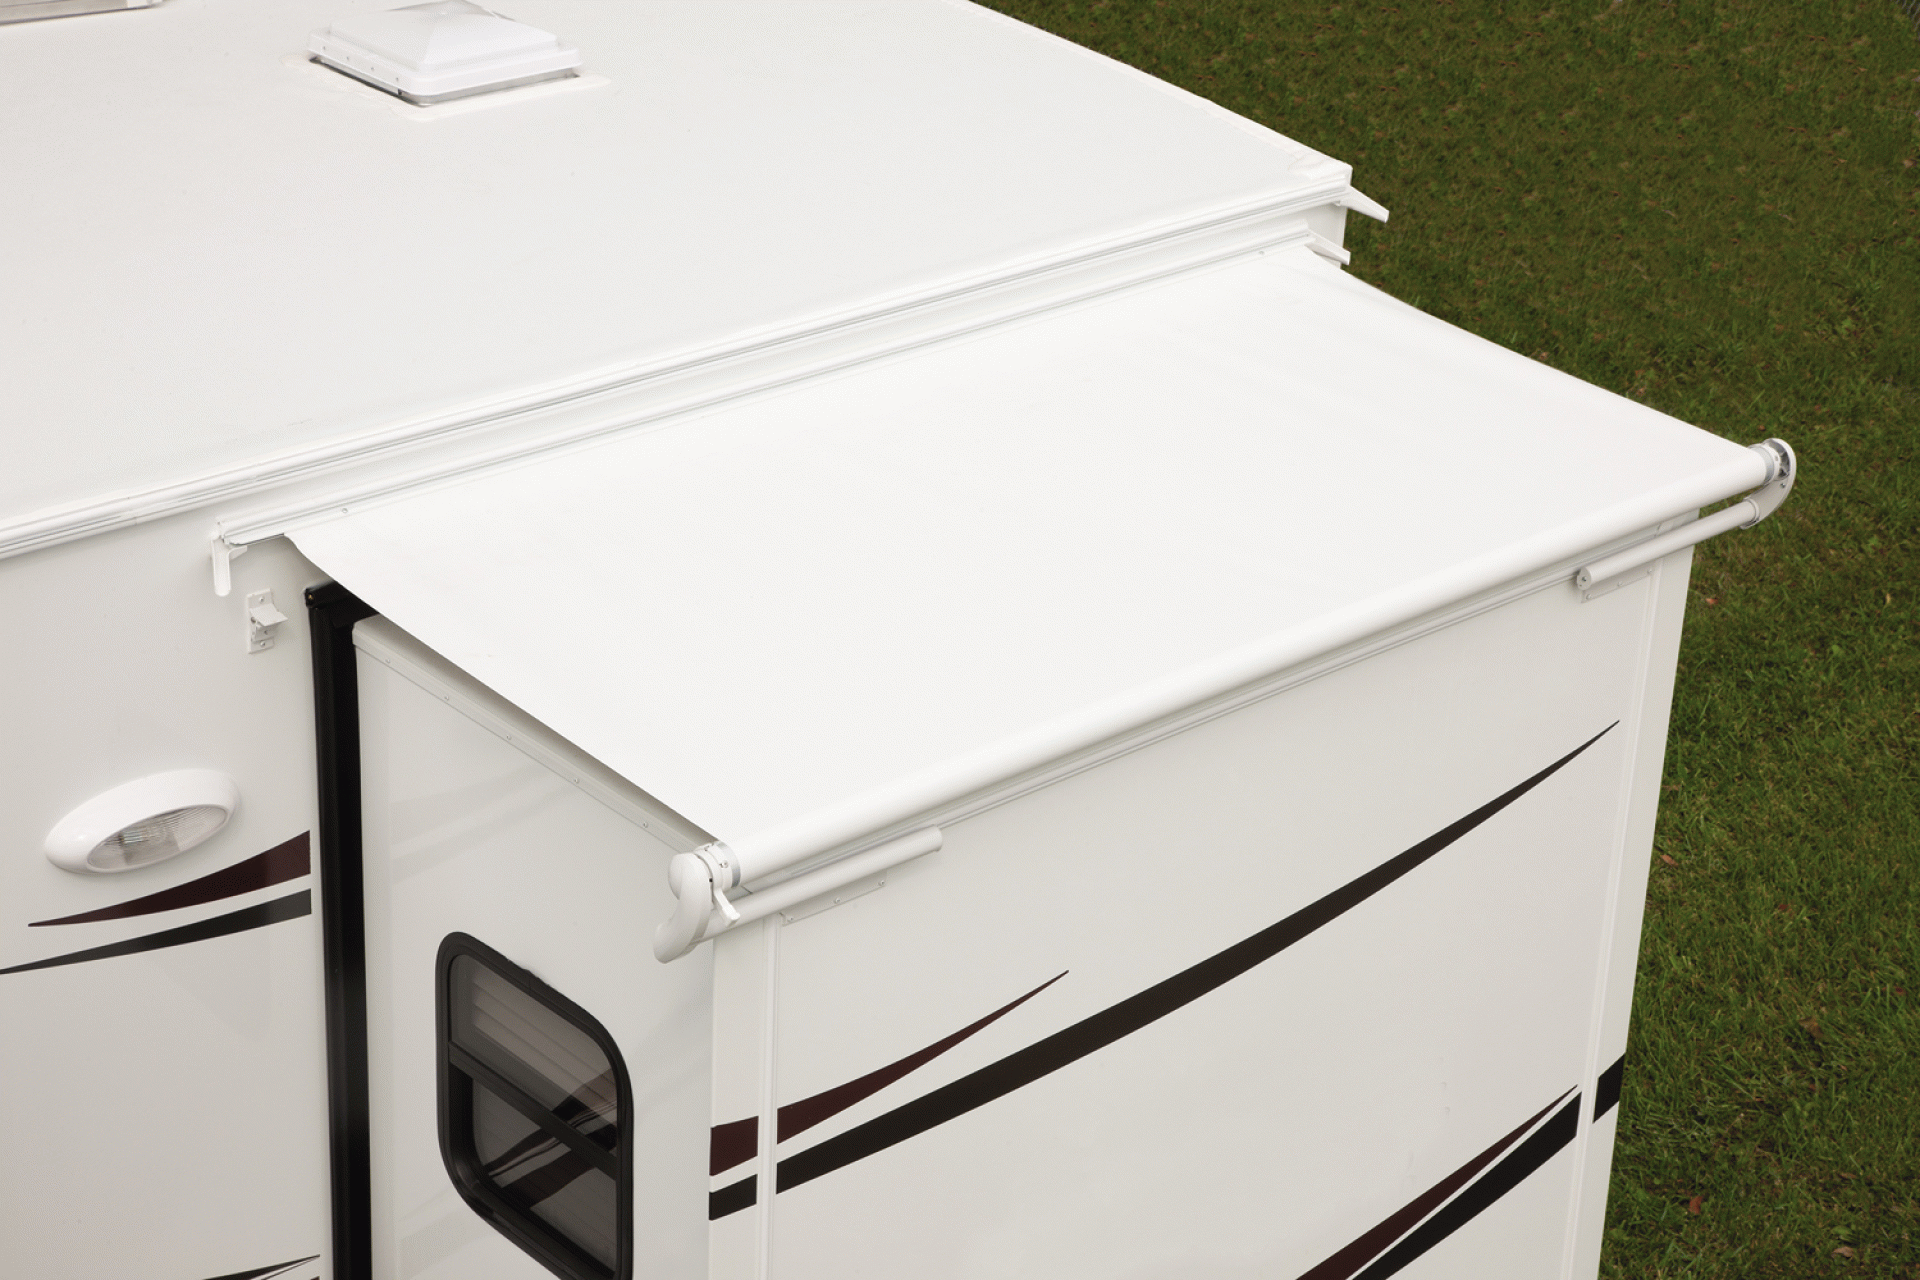 DOMETIC | 98001CQ.144B | DELUXE SLIDE TOPPER 144" FITS ROOM WIDTH 134"-139 3/4" WHITE VINYL WHITE WEATHERSHIELD